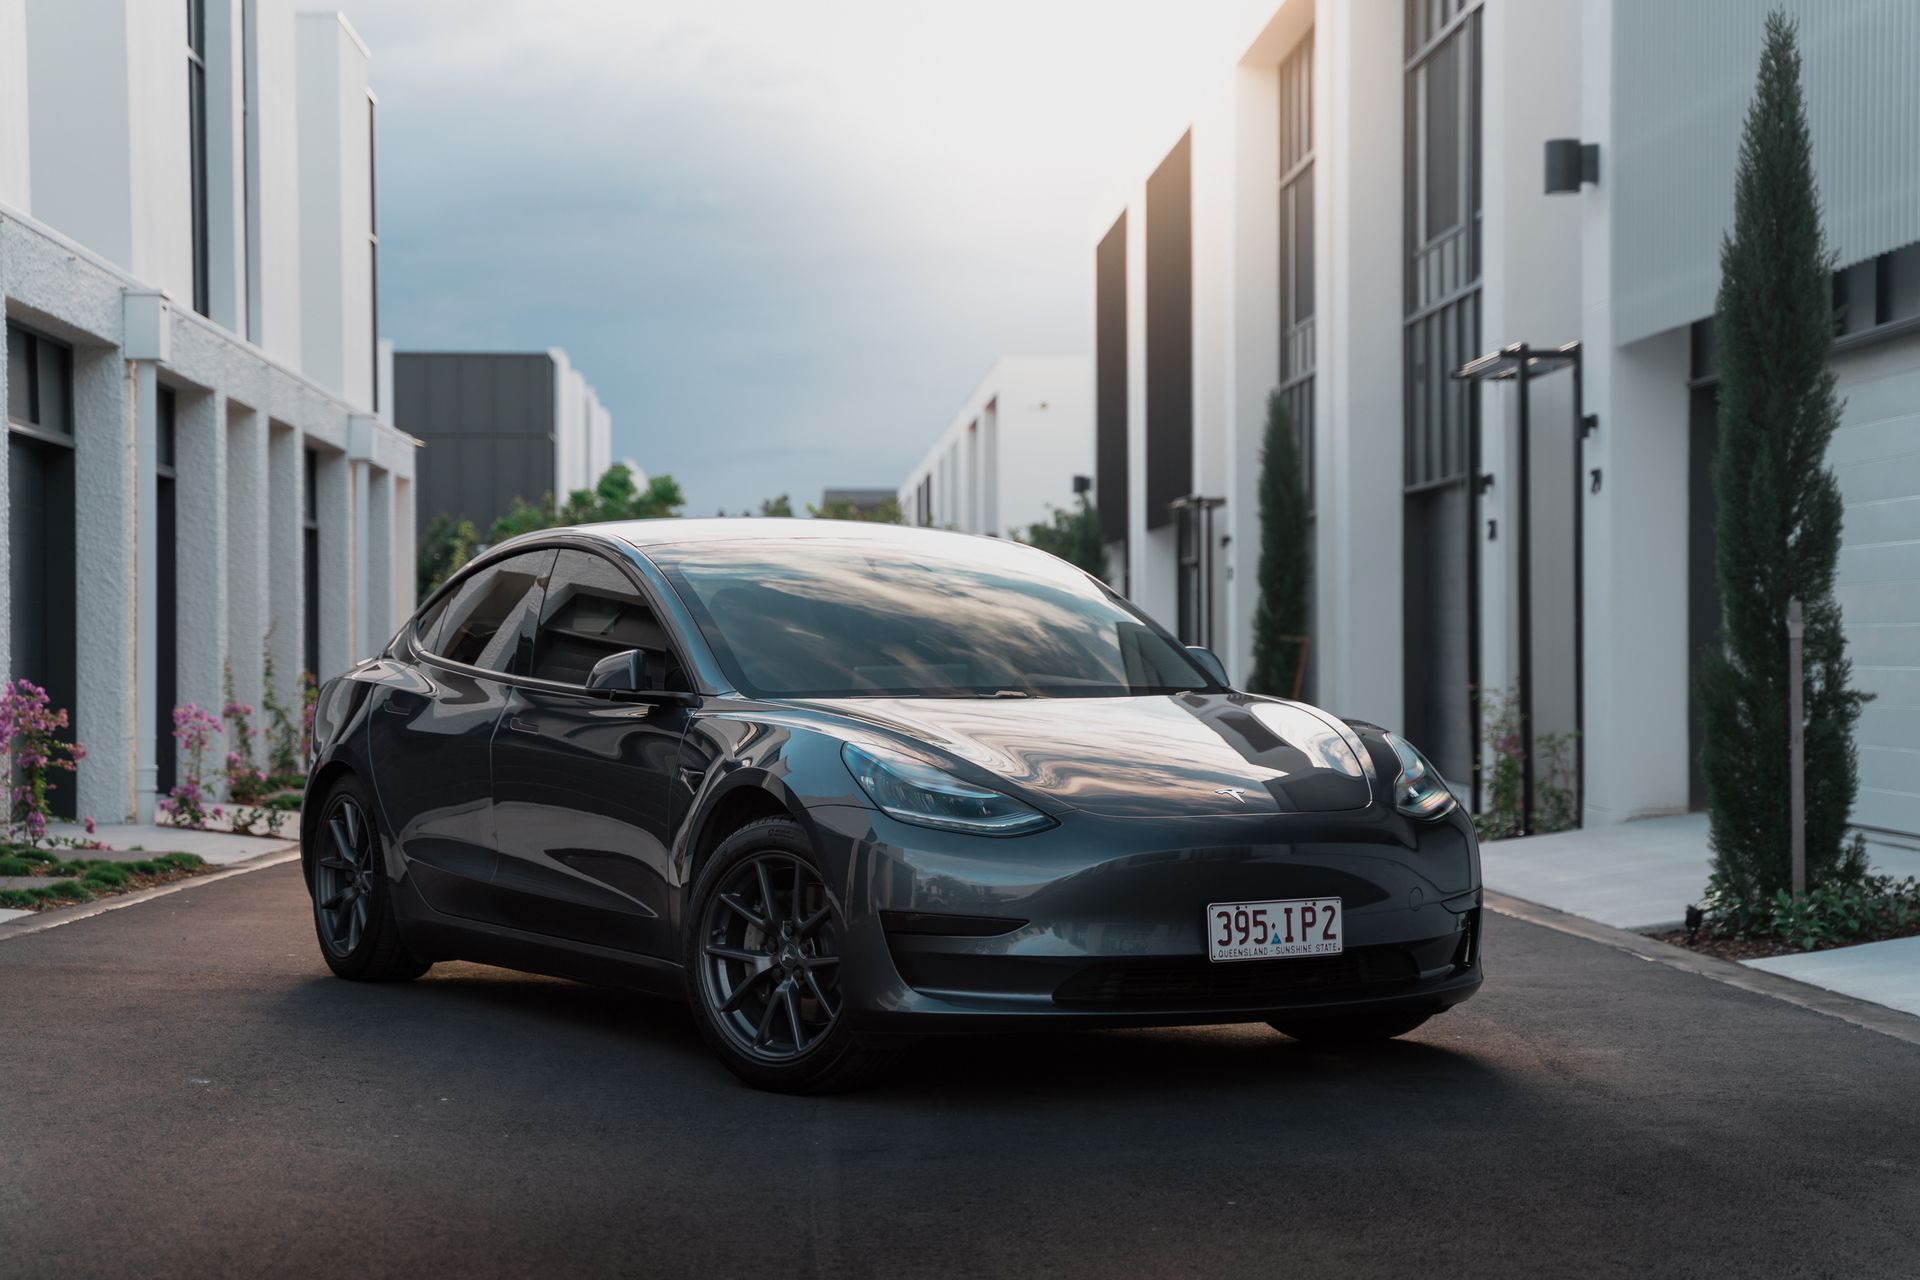 A grey Tesla Model 3 parked on a road -  sold to Sell Any Car Fast In Eagle Farm, QLD